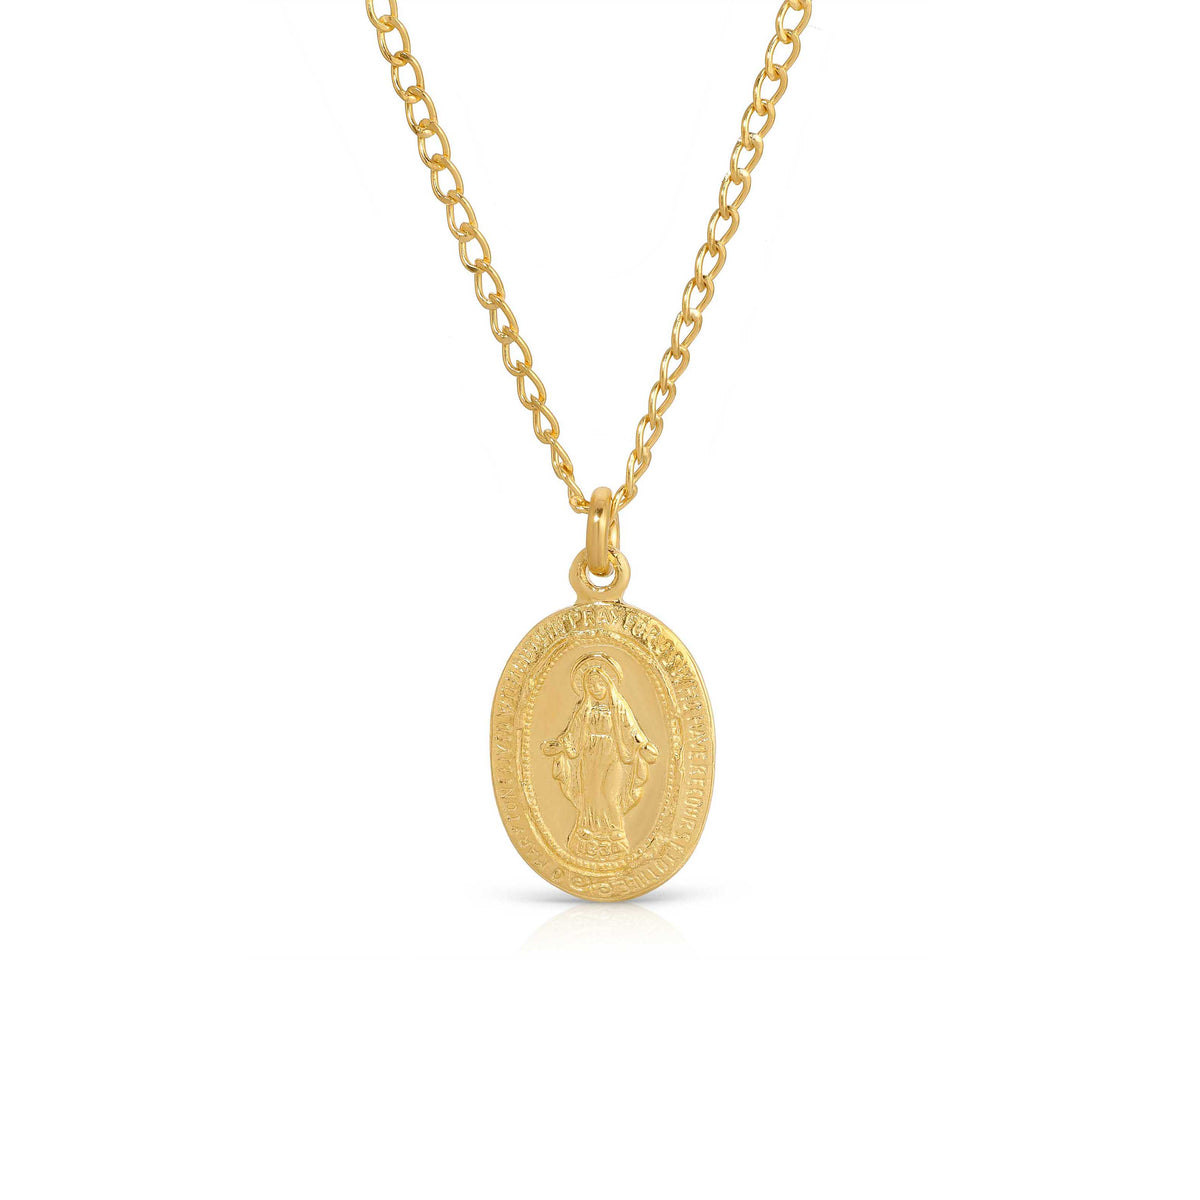 Small Virgin Mary Medallion Necklace, Gold or Silver